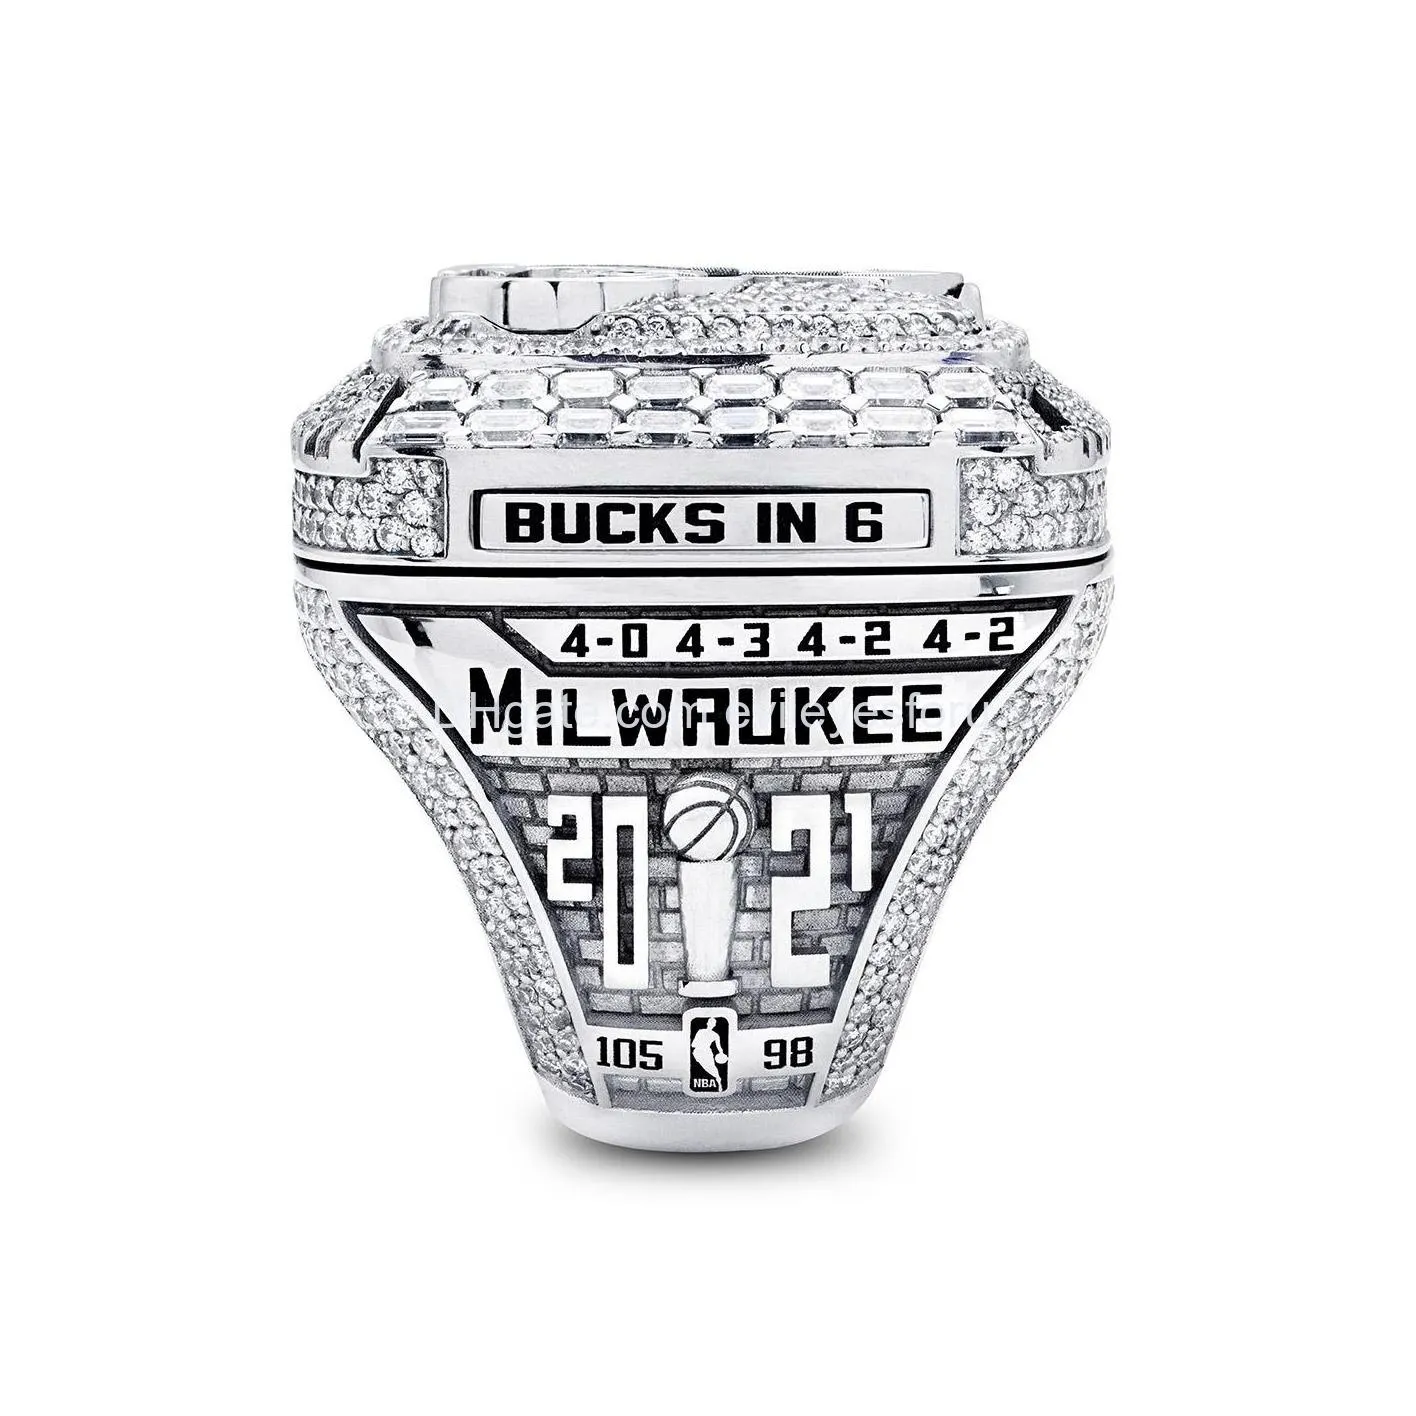 2020 wholesale 2021 championship ring bucks fashion gifts from fans and friends leather bag parts accessories